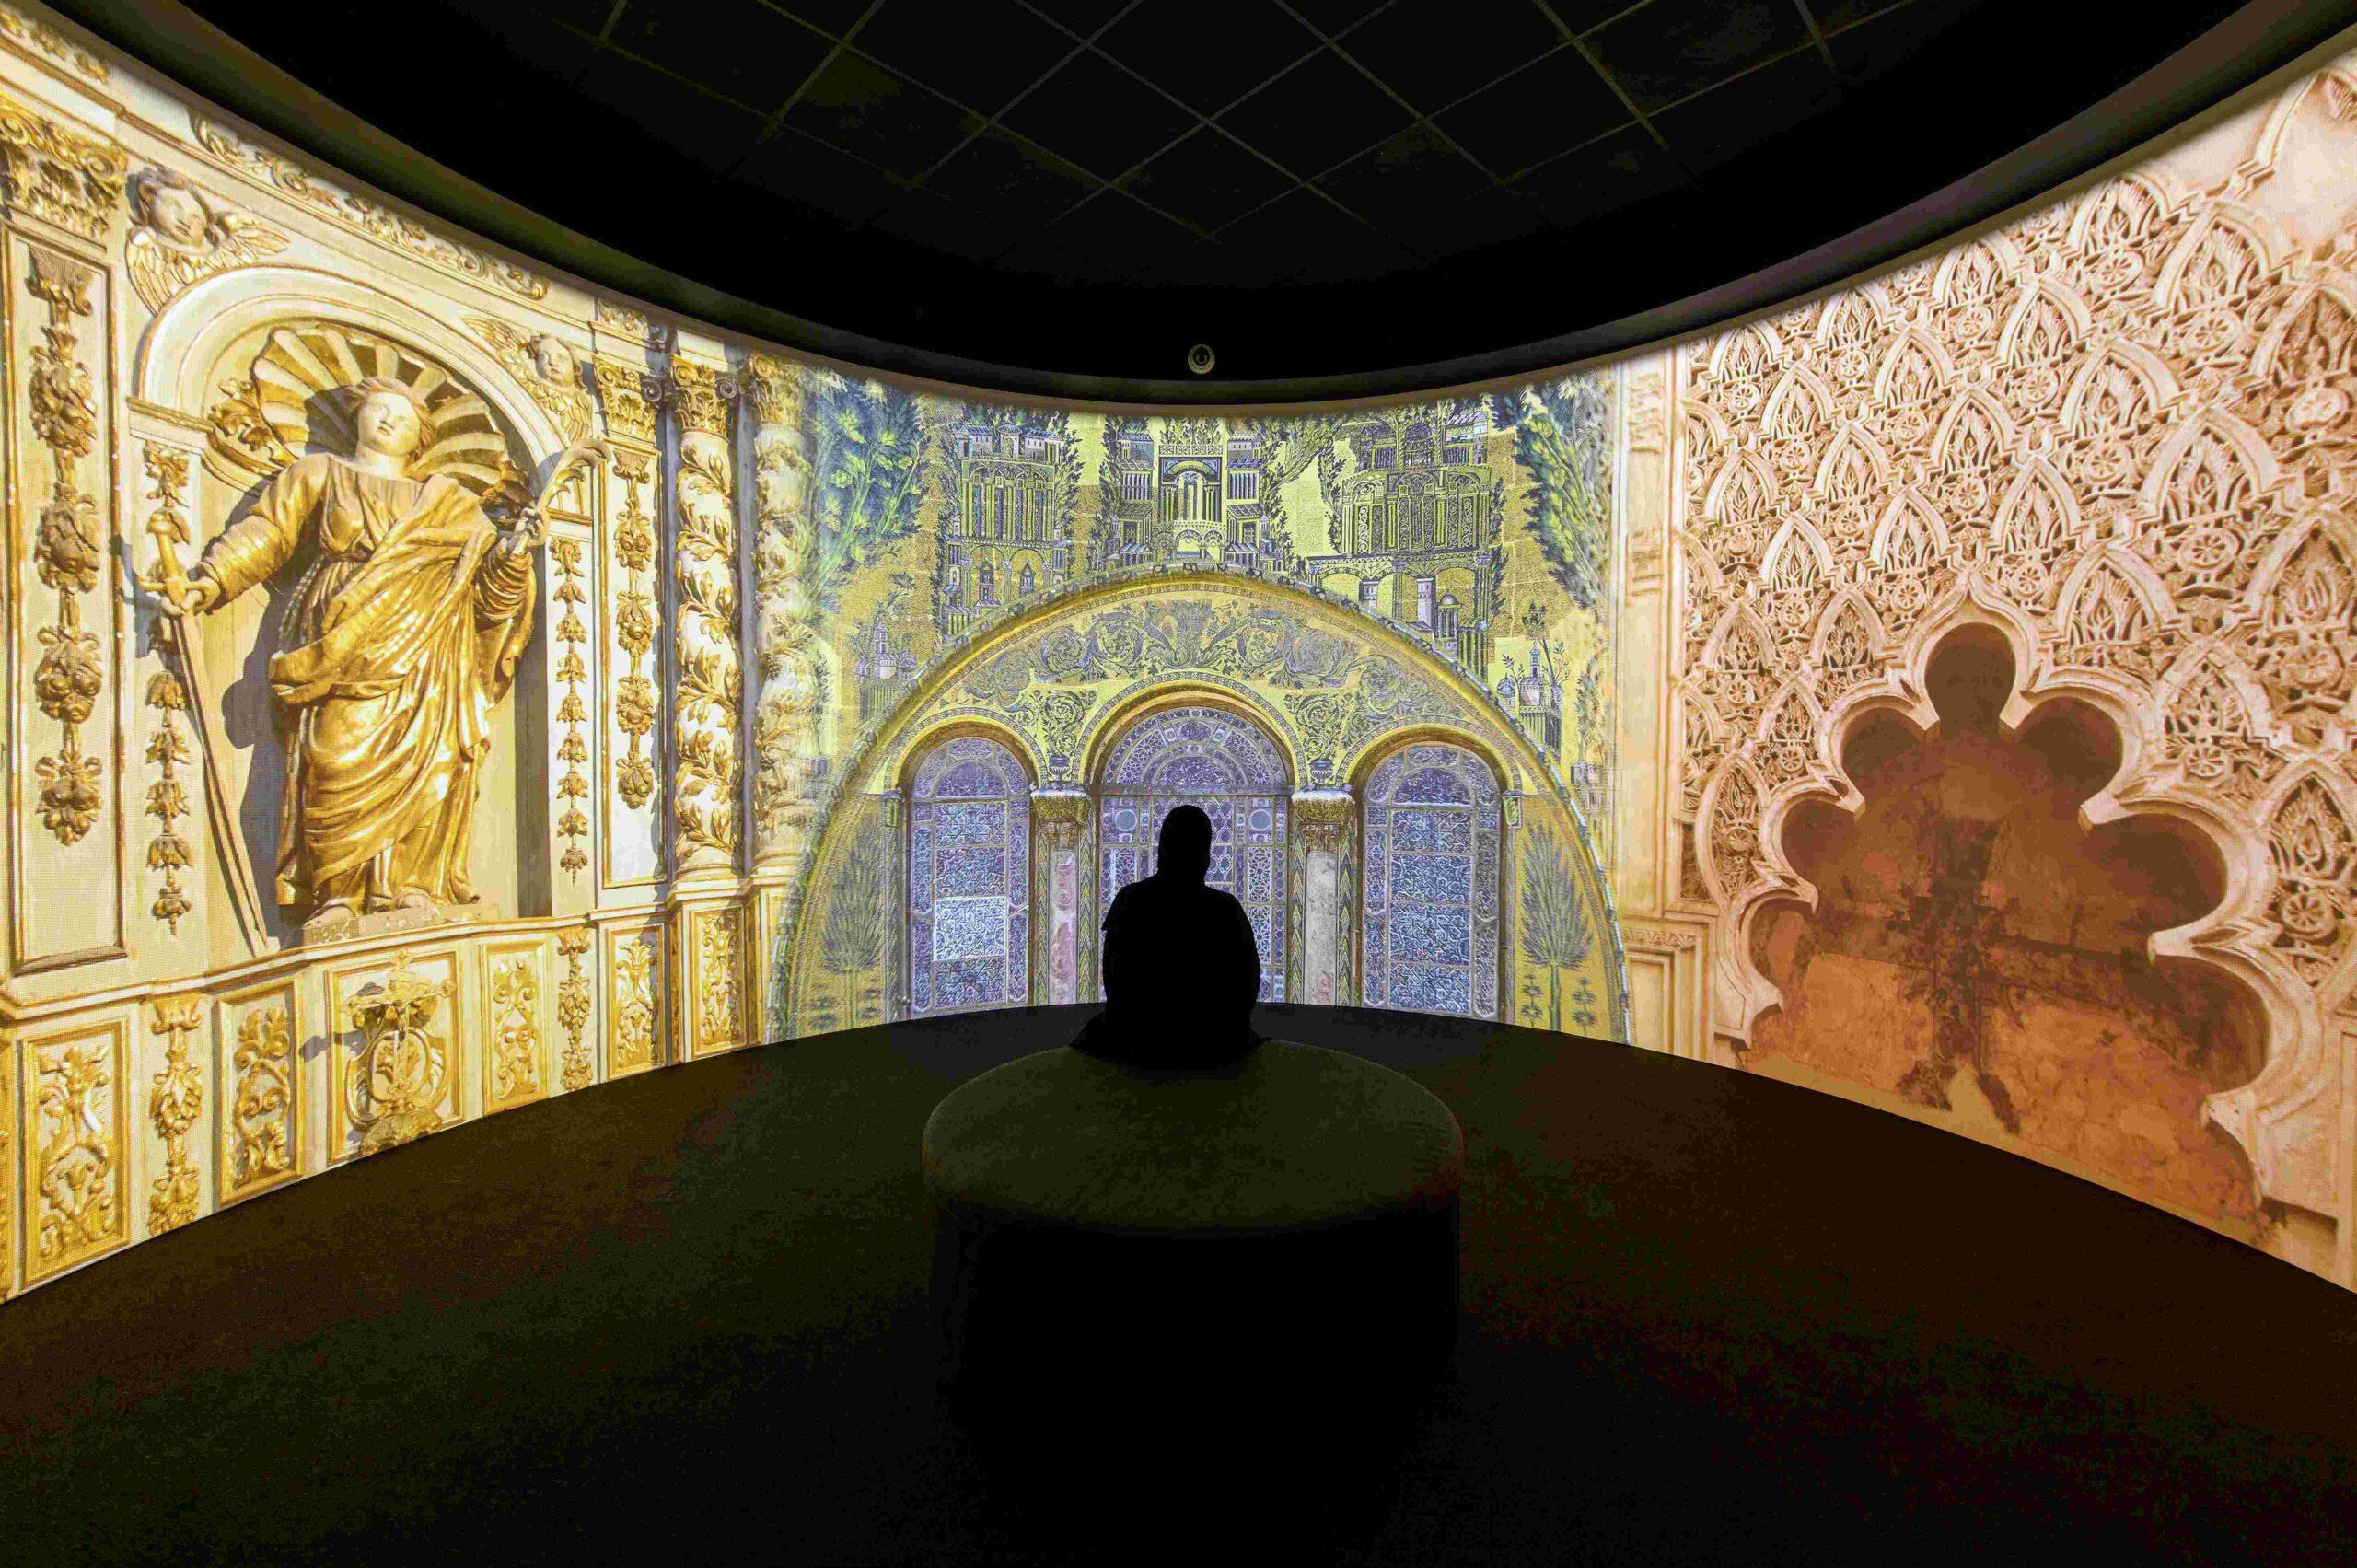 A monotheistic exhibition has been unveiled at Louvre Abu Dhabi